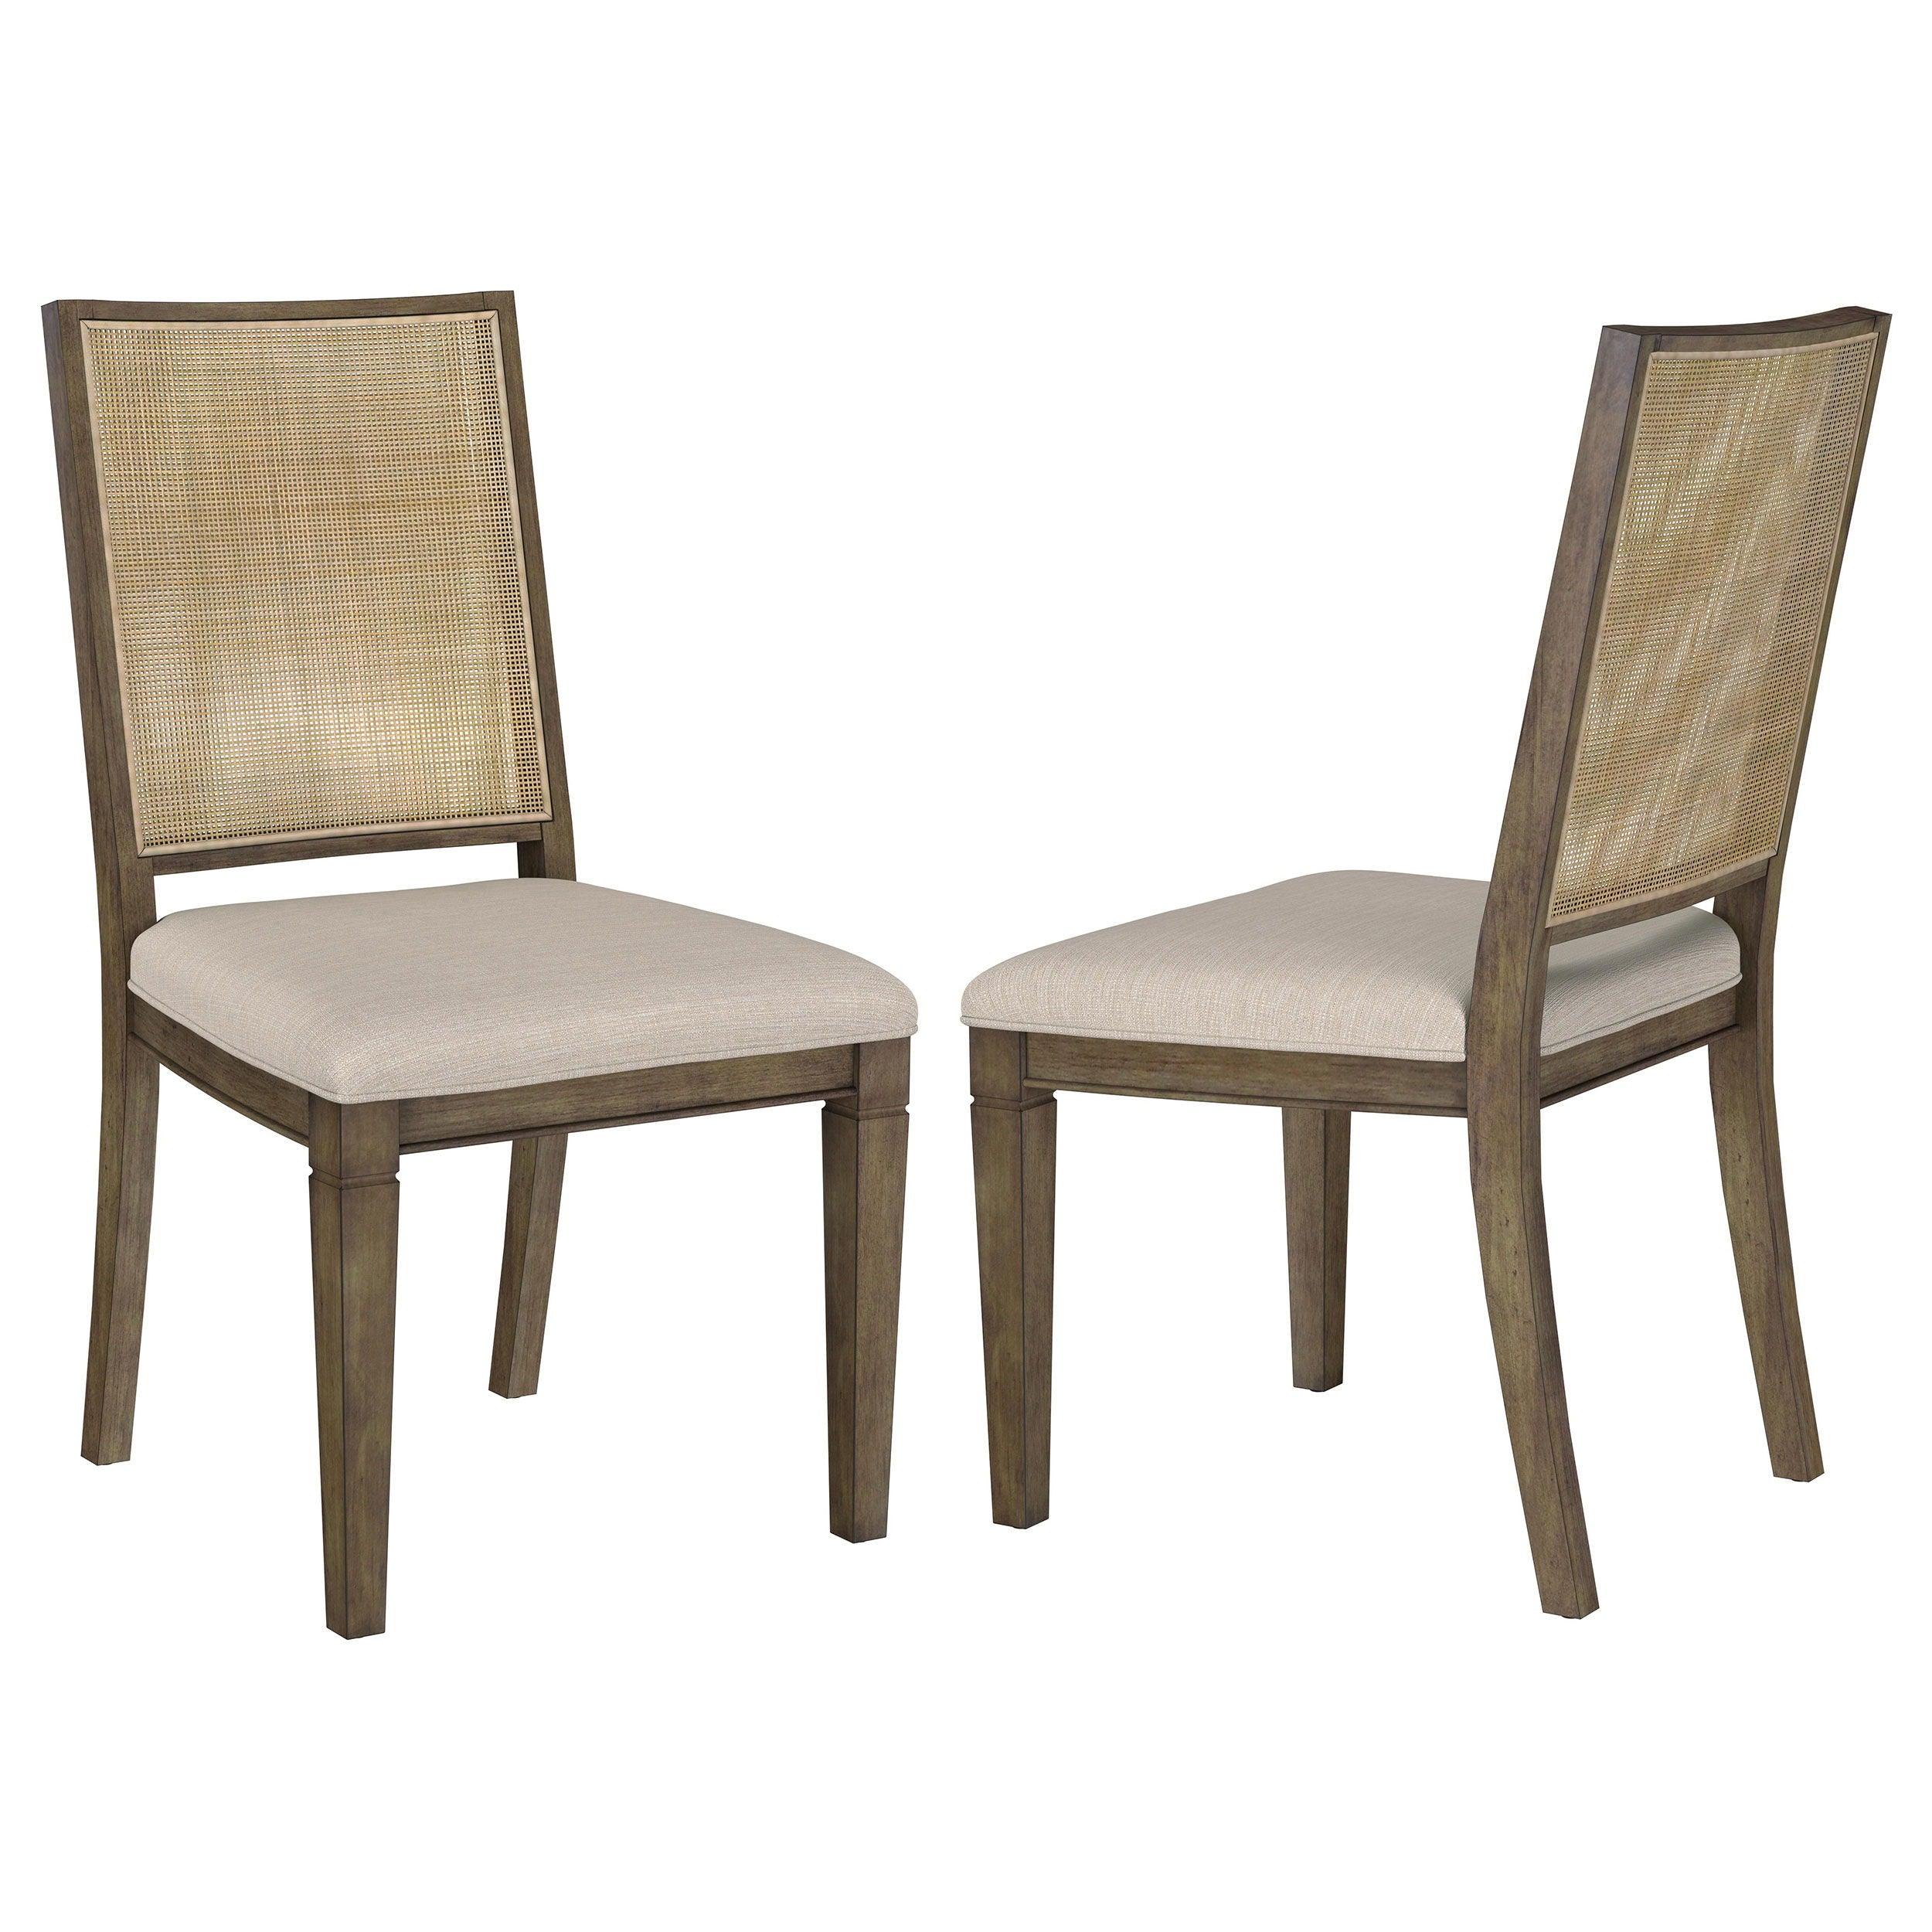 Coaster Fine Furniture - Matisse - Woven Rattan Back Dining Side Chair (Set of 2) - Brown - 5th Avenue Furniture